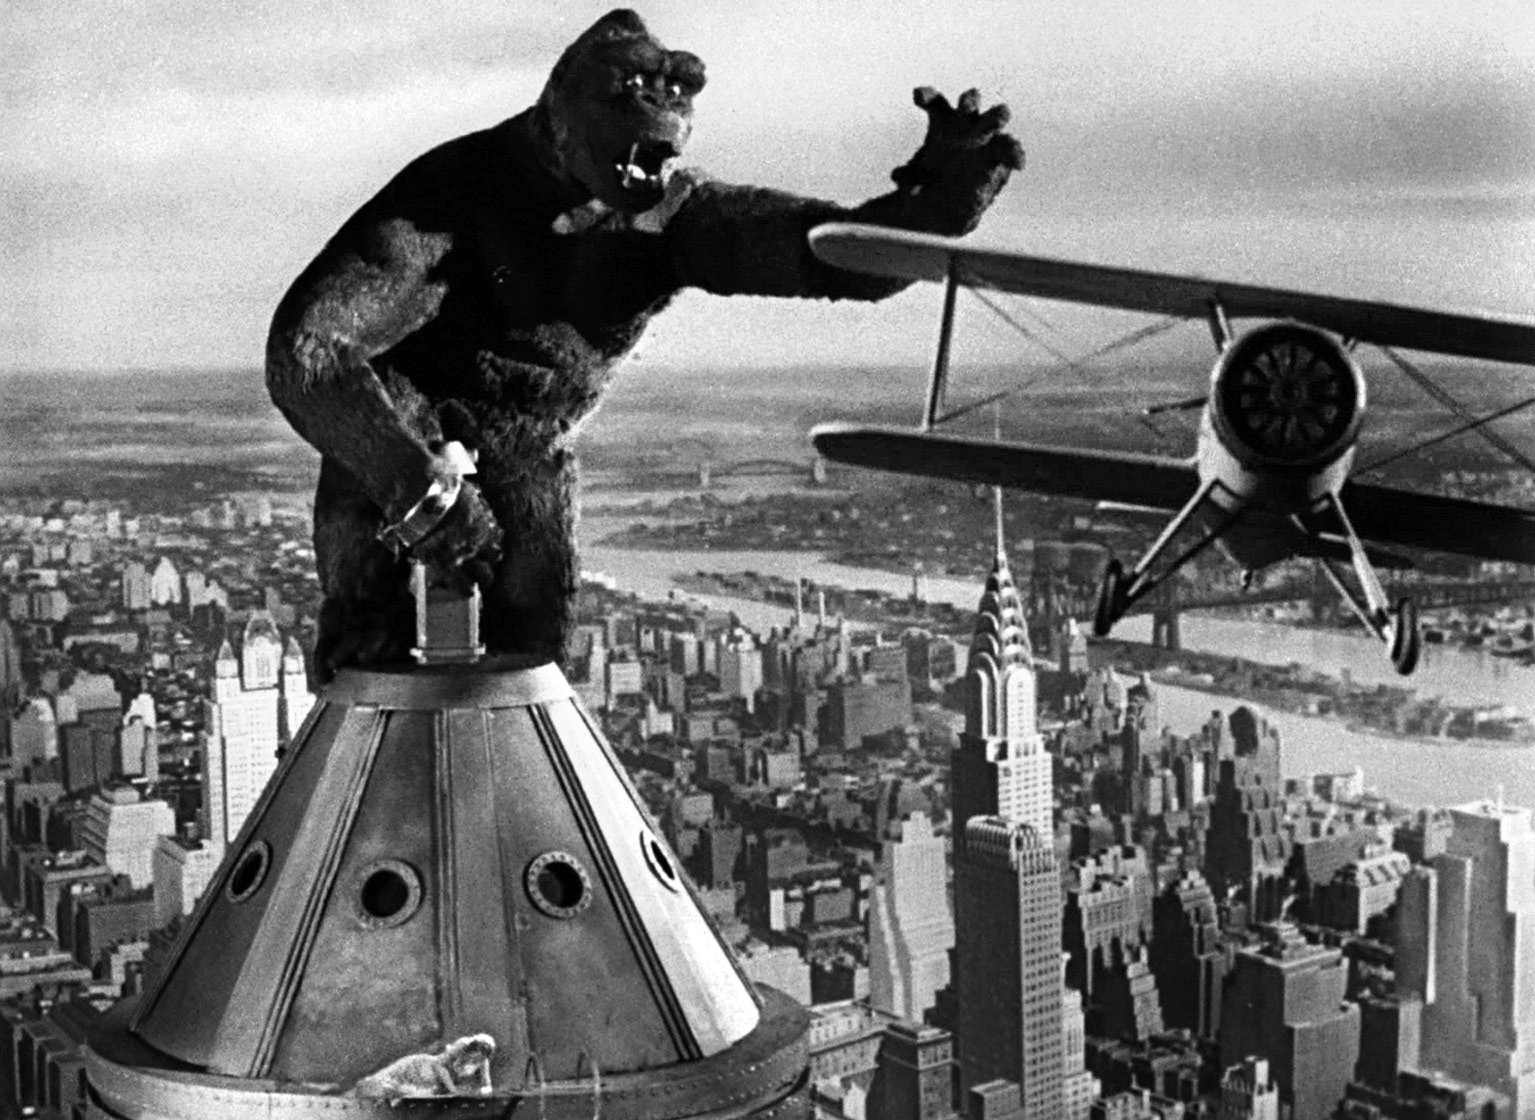 Merian Cooper was the producer of the 1933 film hit King Kong and also played one of the Army pilots who flew against the giant ape, killing the animal at the climax of the film.